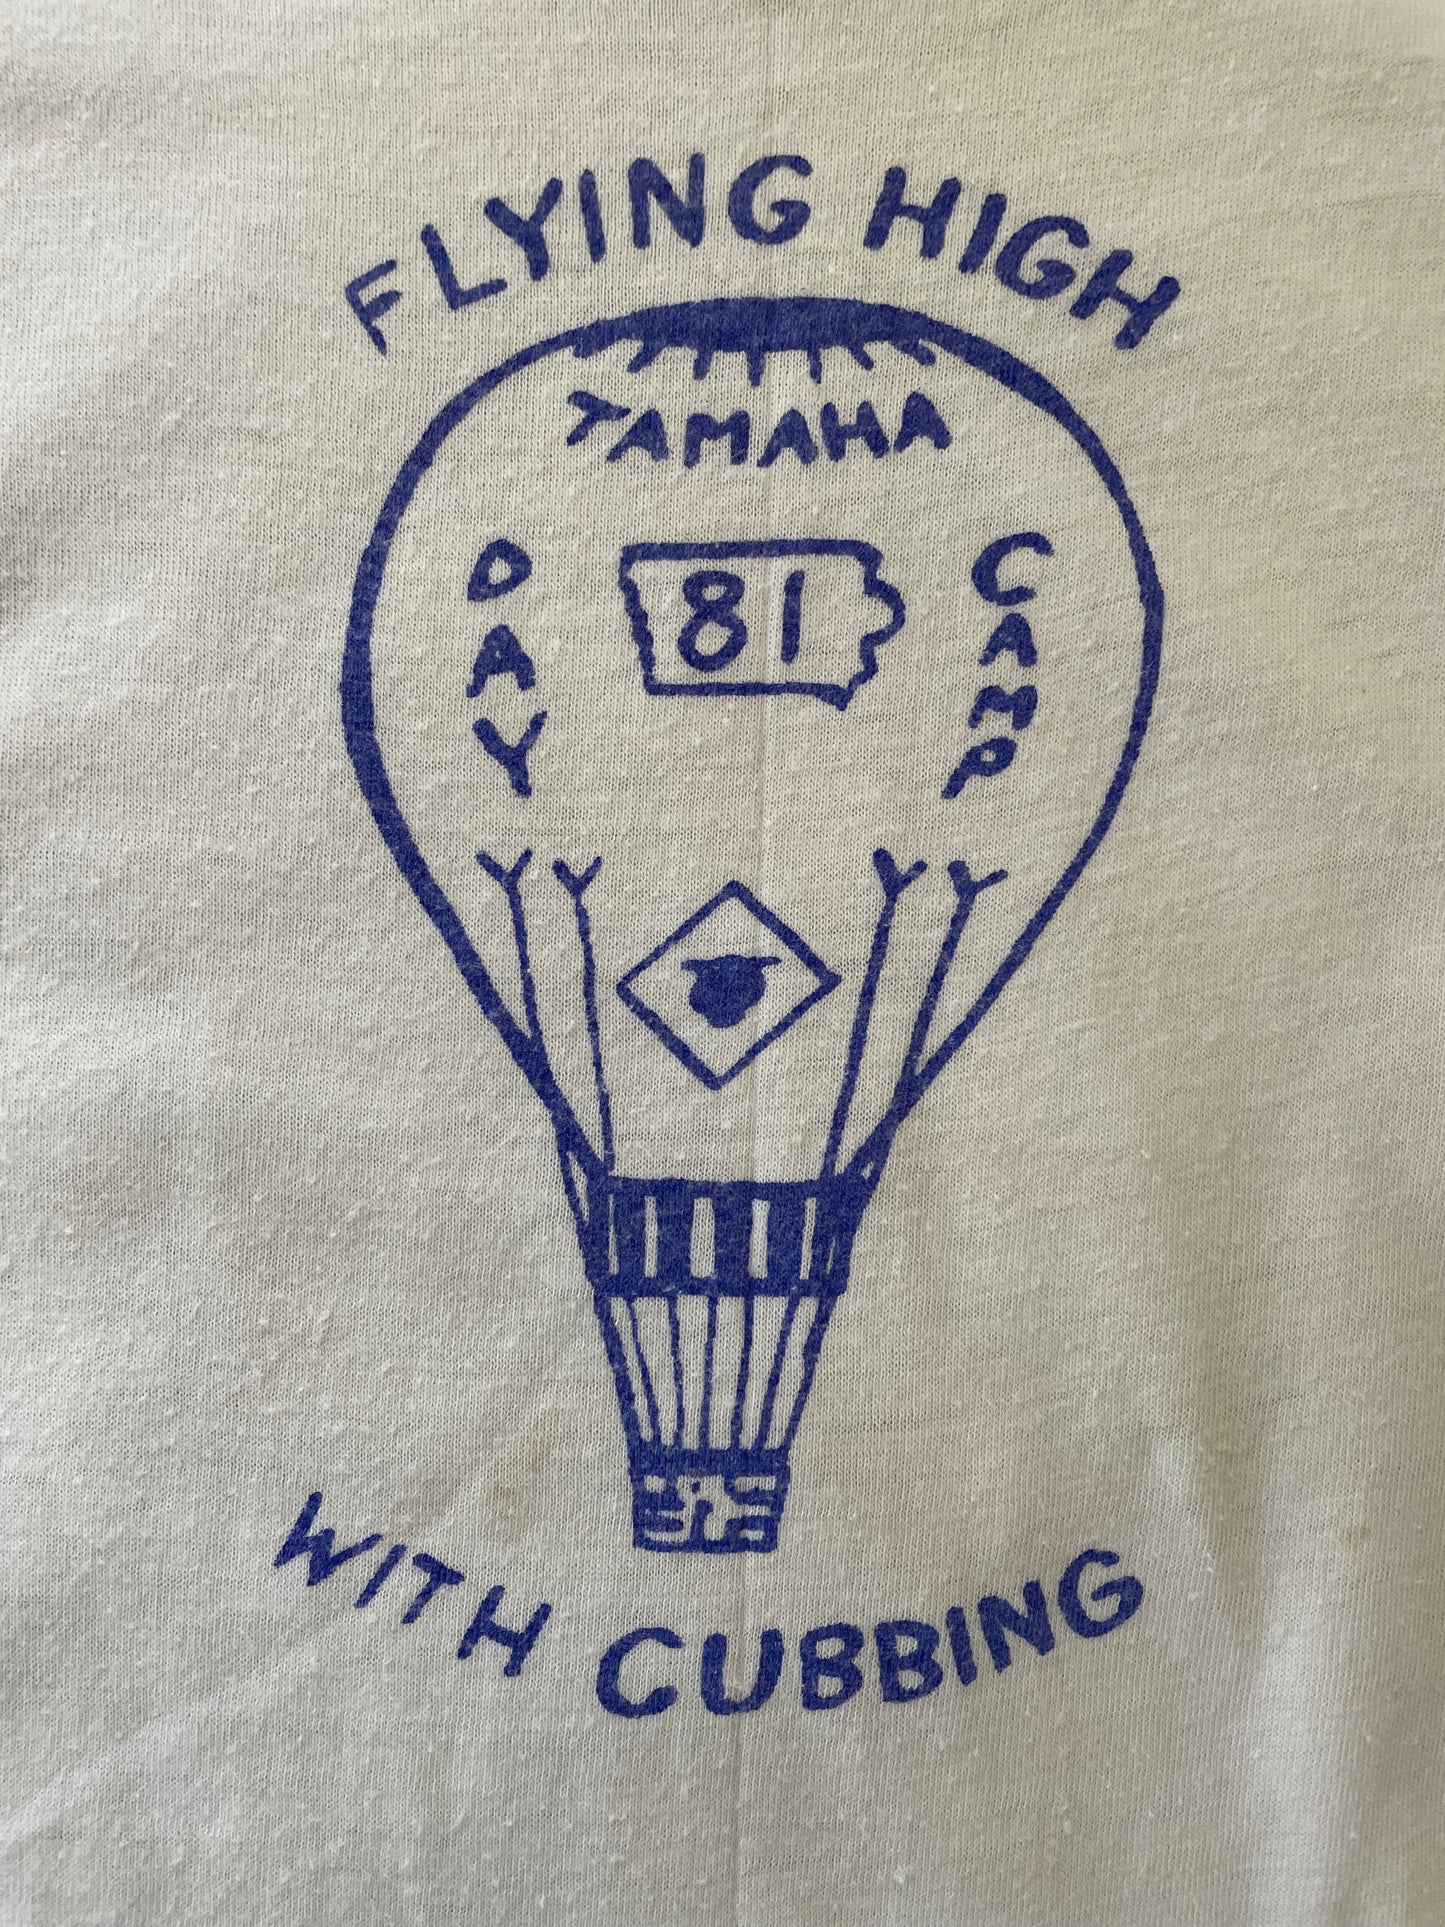 Tamaha Day Camp, 81: Flying High With Cubbing Tee